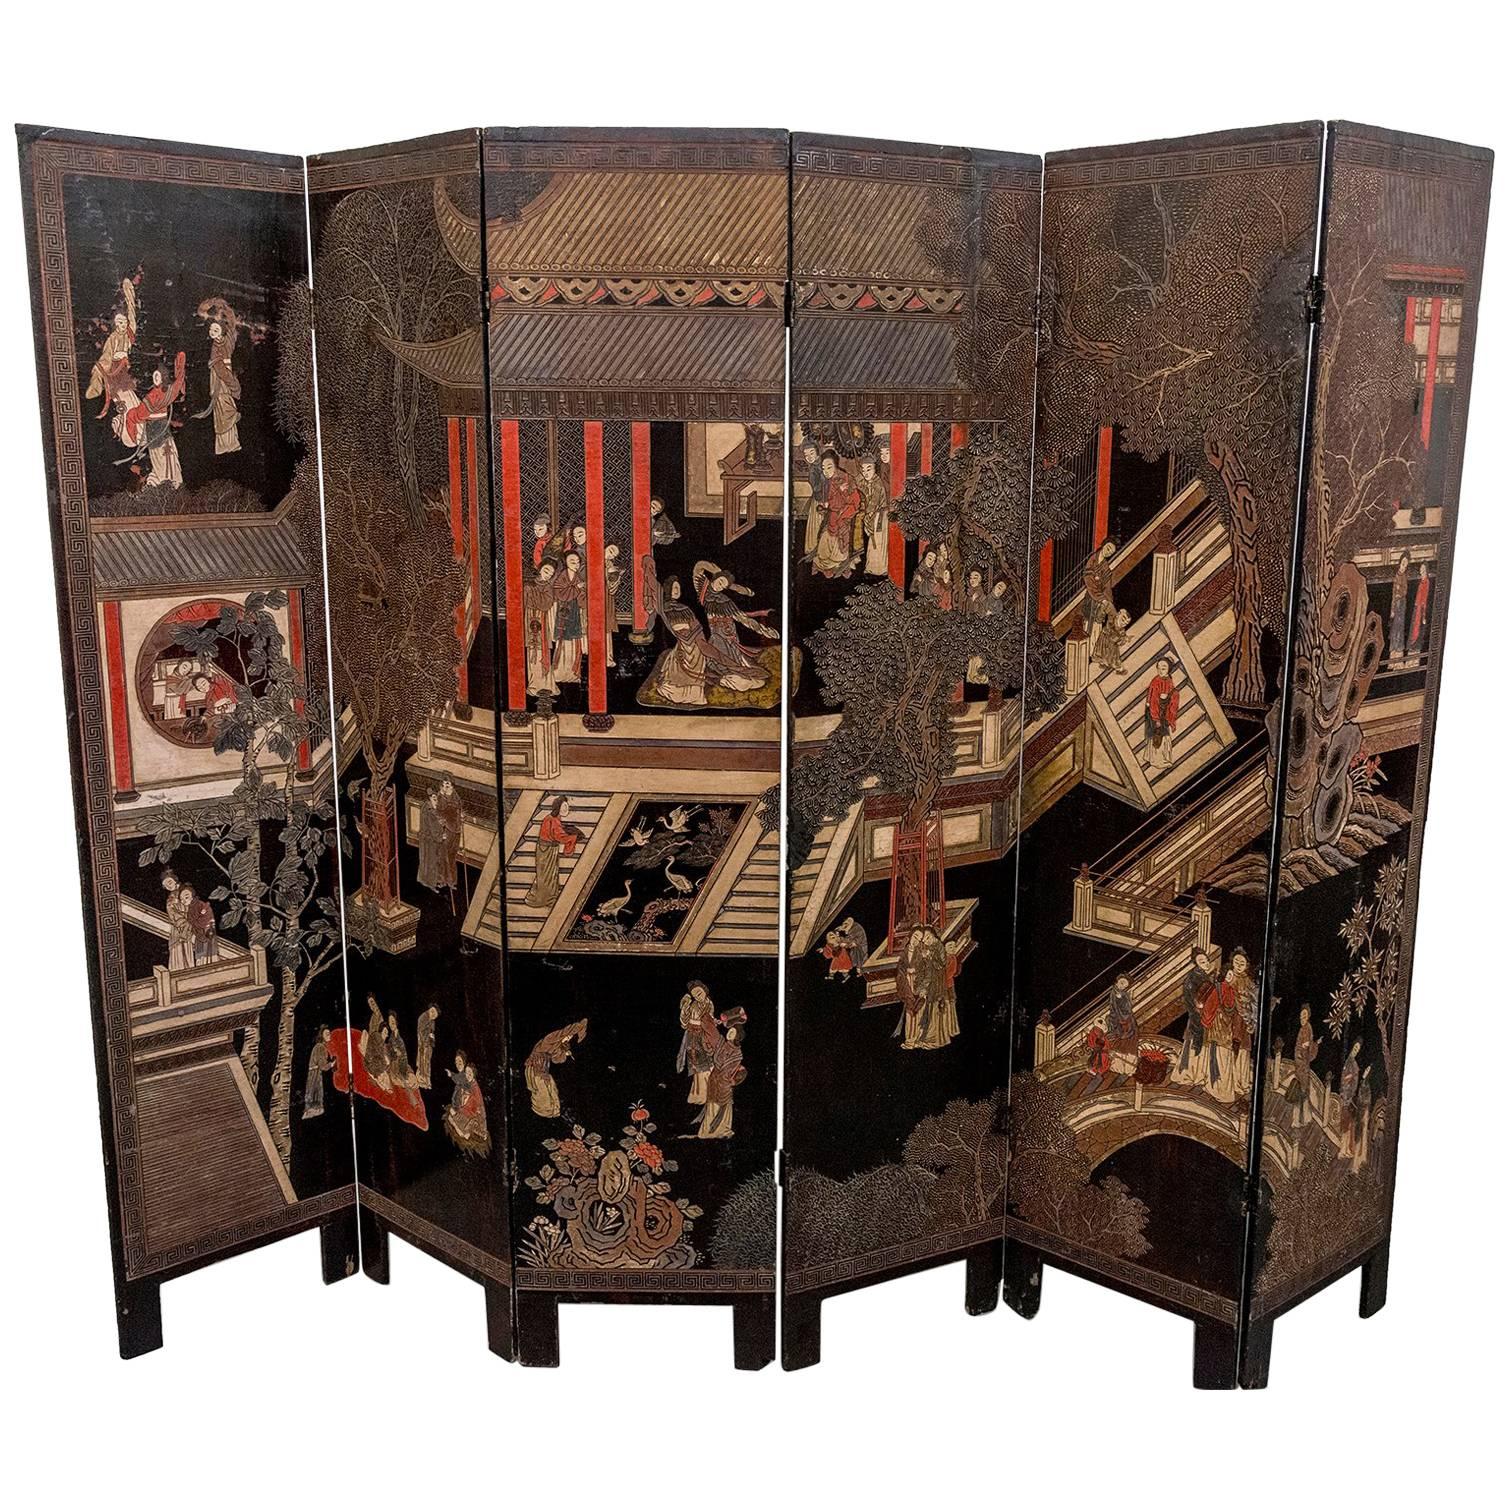 Coromandel Screen with Carved Asian Paintings and Written Characters